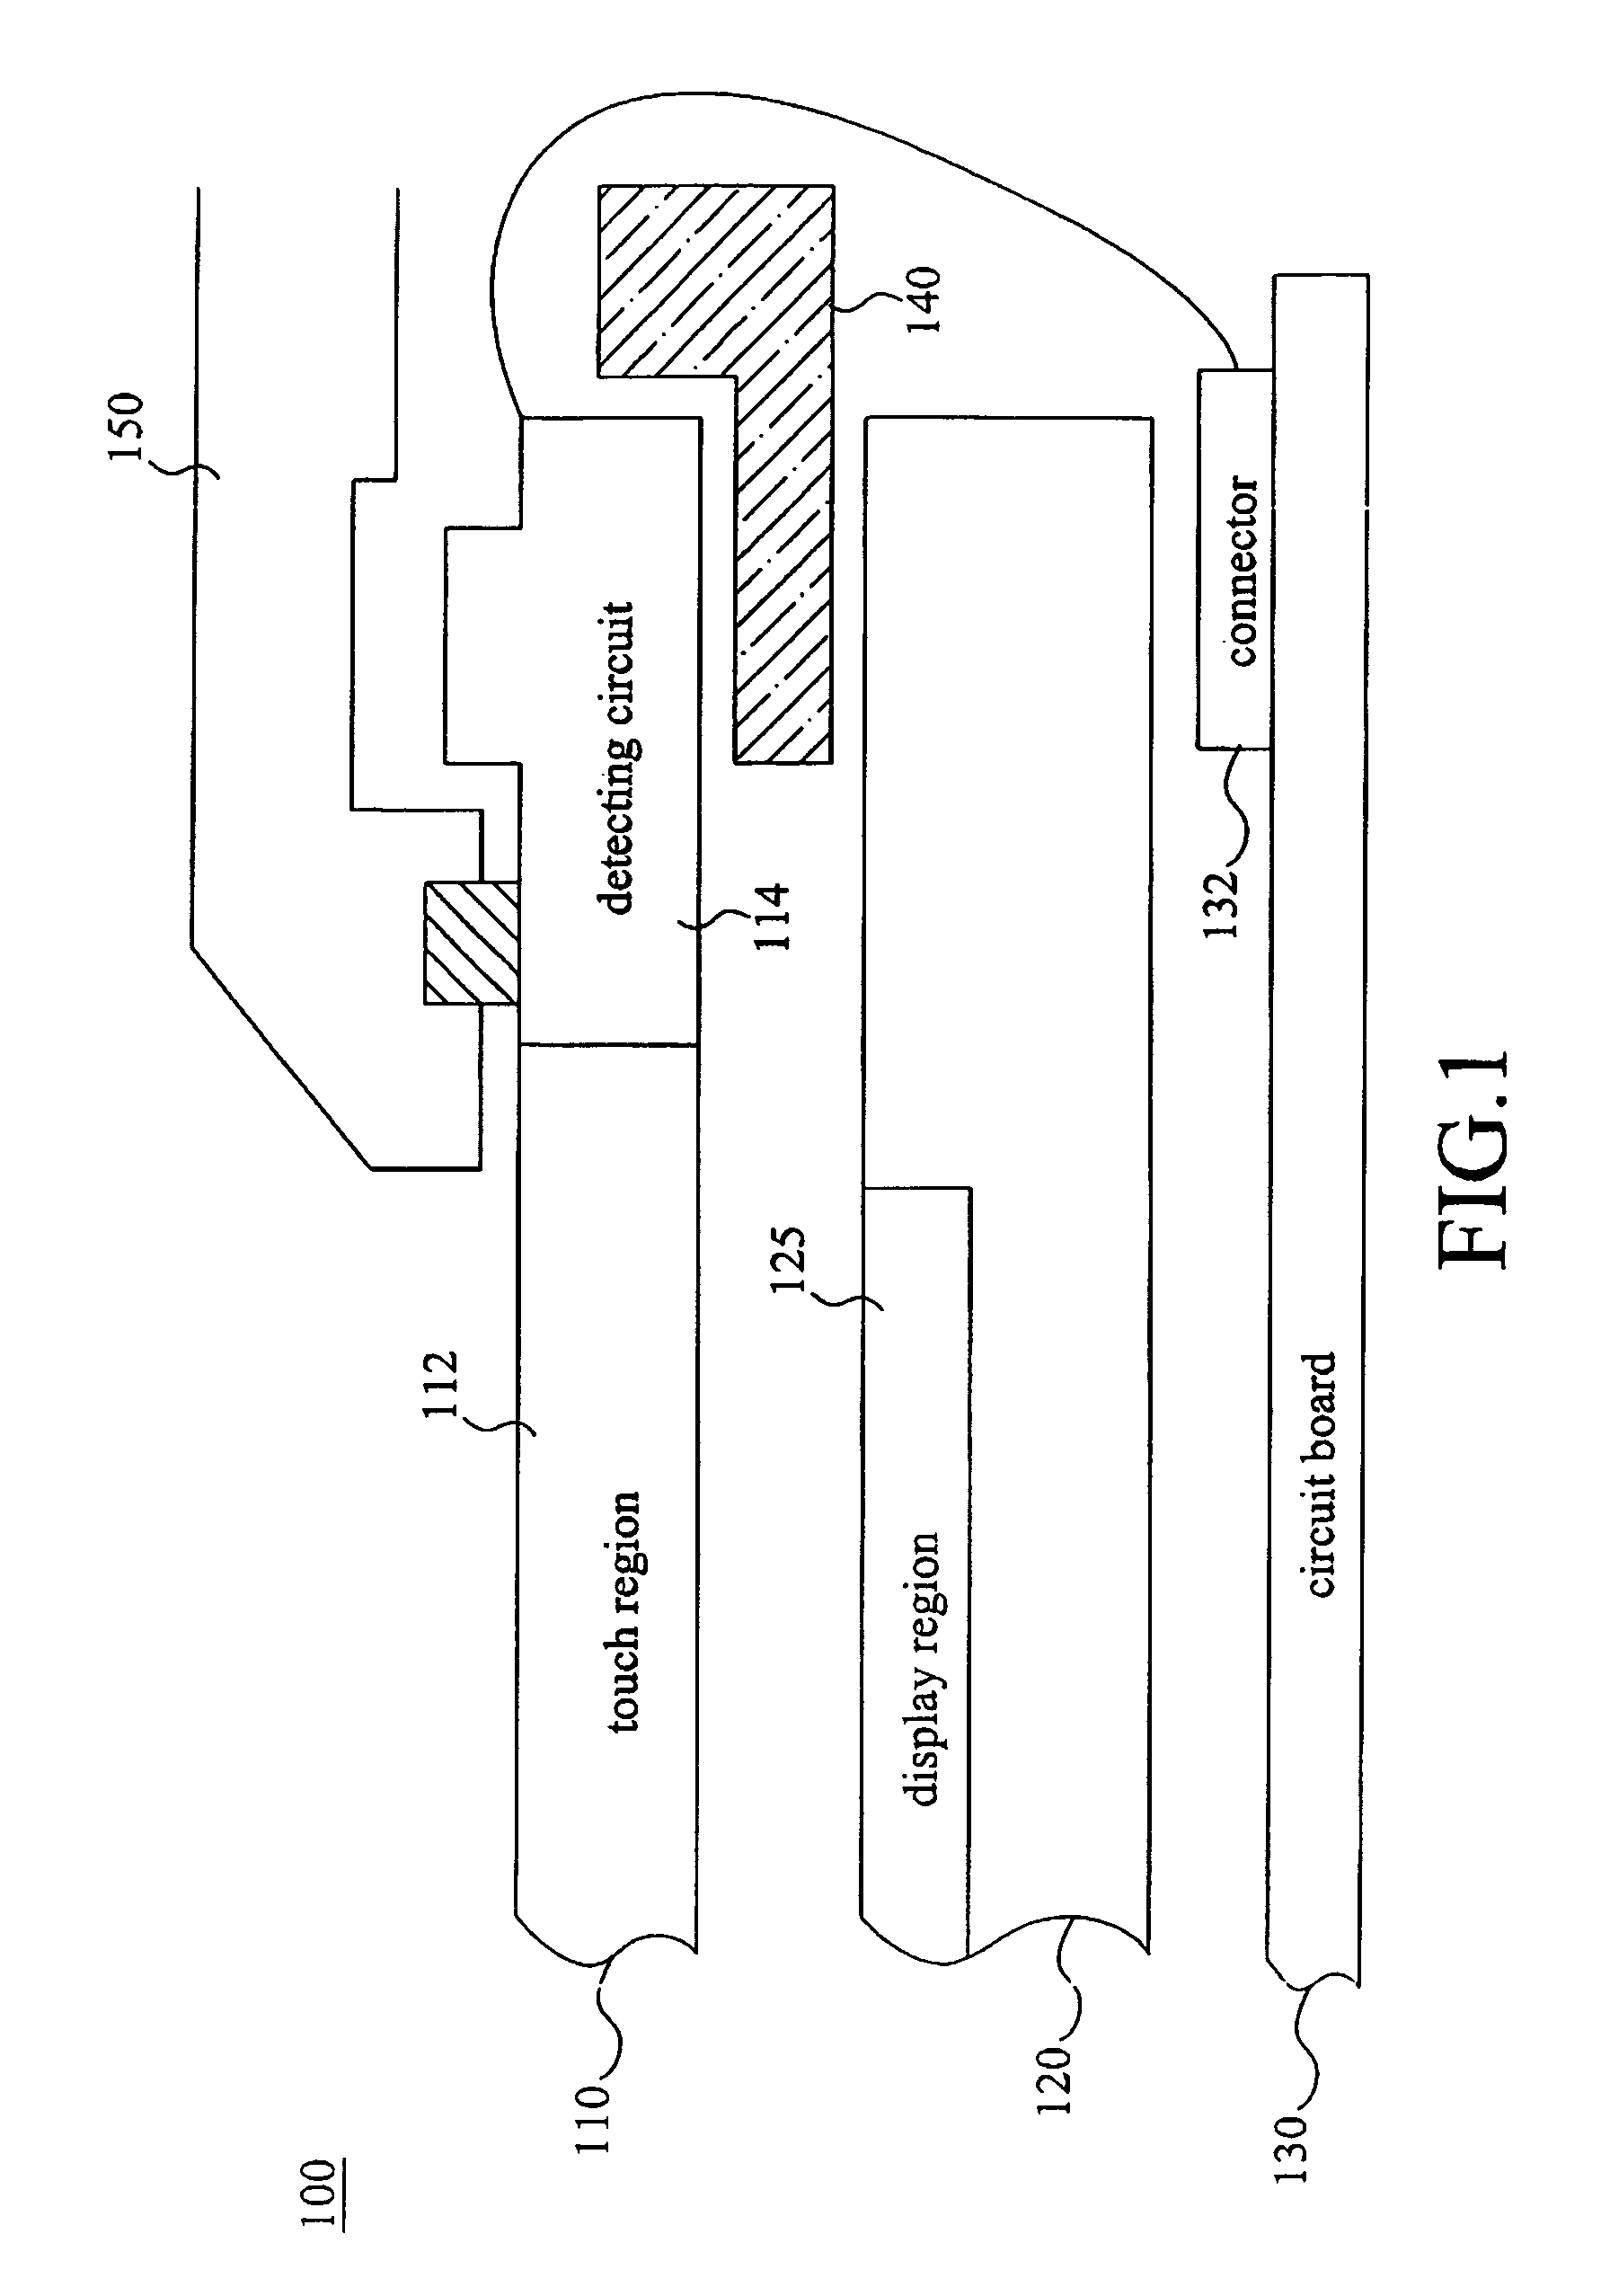 Integrated pixel structure, integrated touch panel LCD device and method of controlling the same